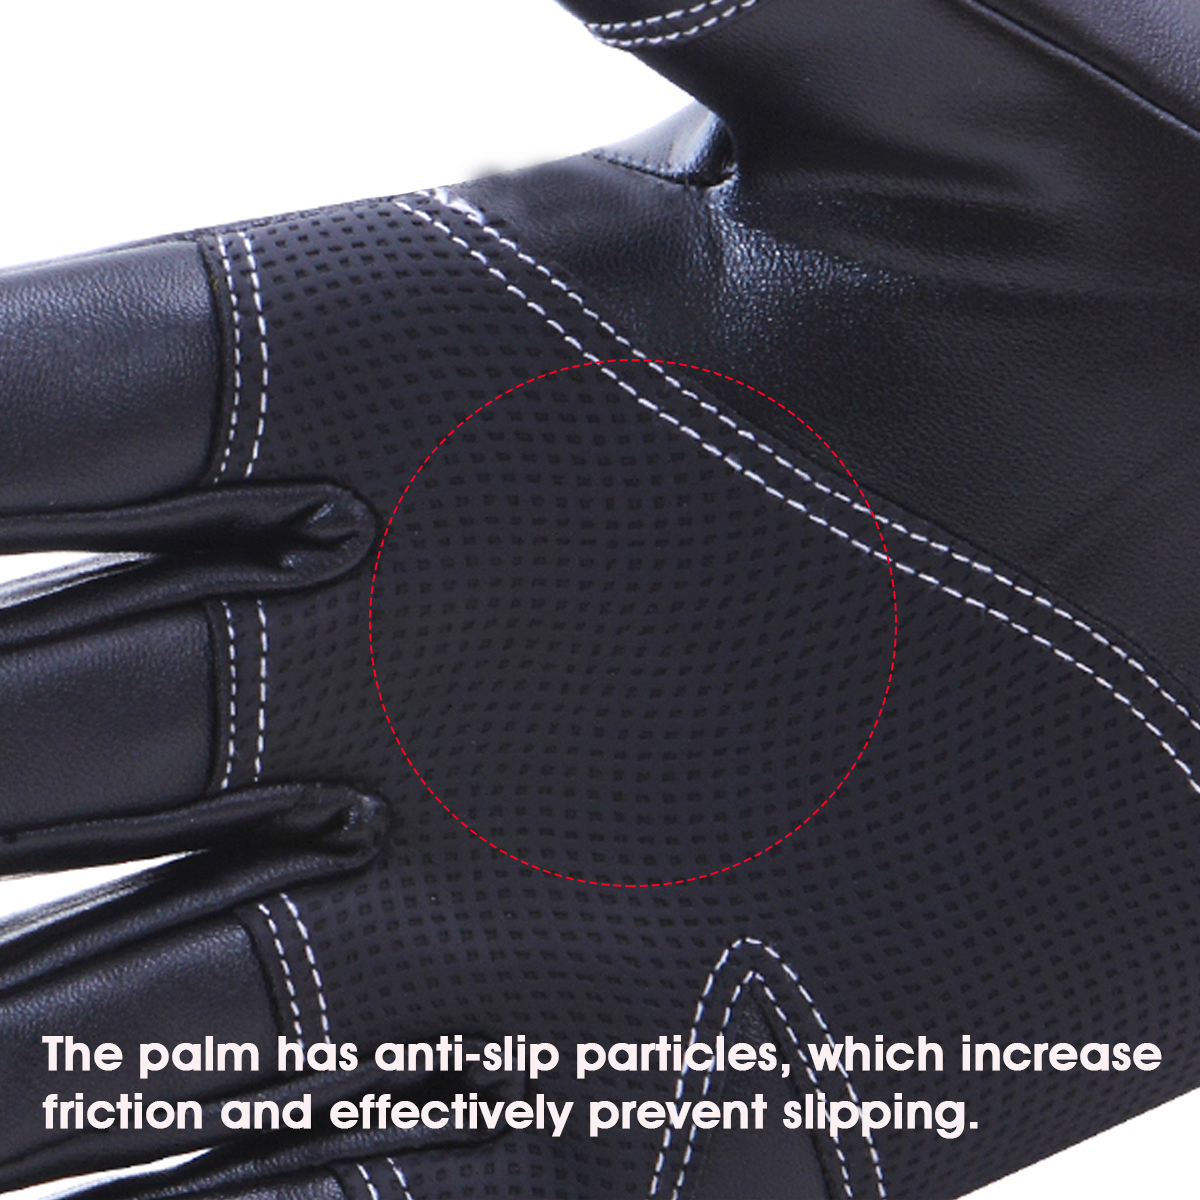 Winter-Warm-Touch-Screen-PU-Leather-Gloves-Ski-Snow-Snowboard-Cycling-Waterproof-Windproof-Gloves-1923190-5